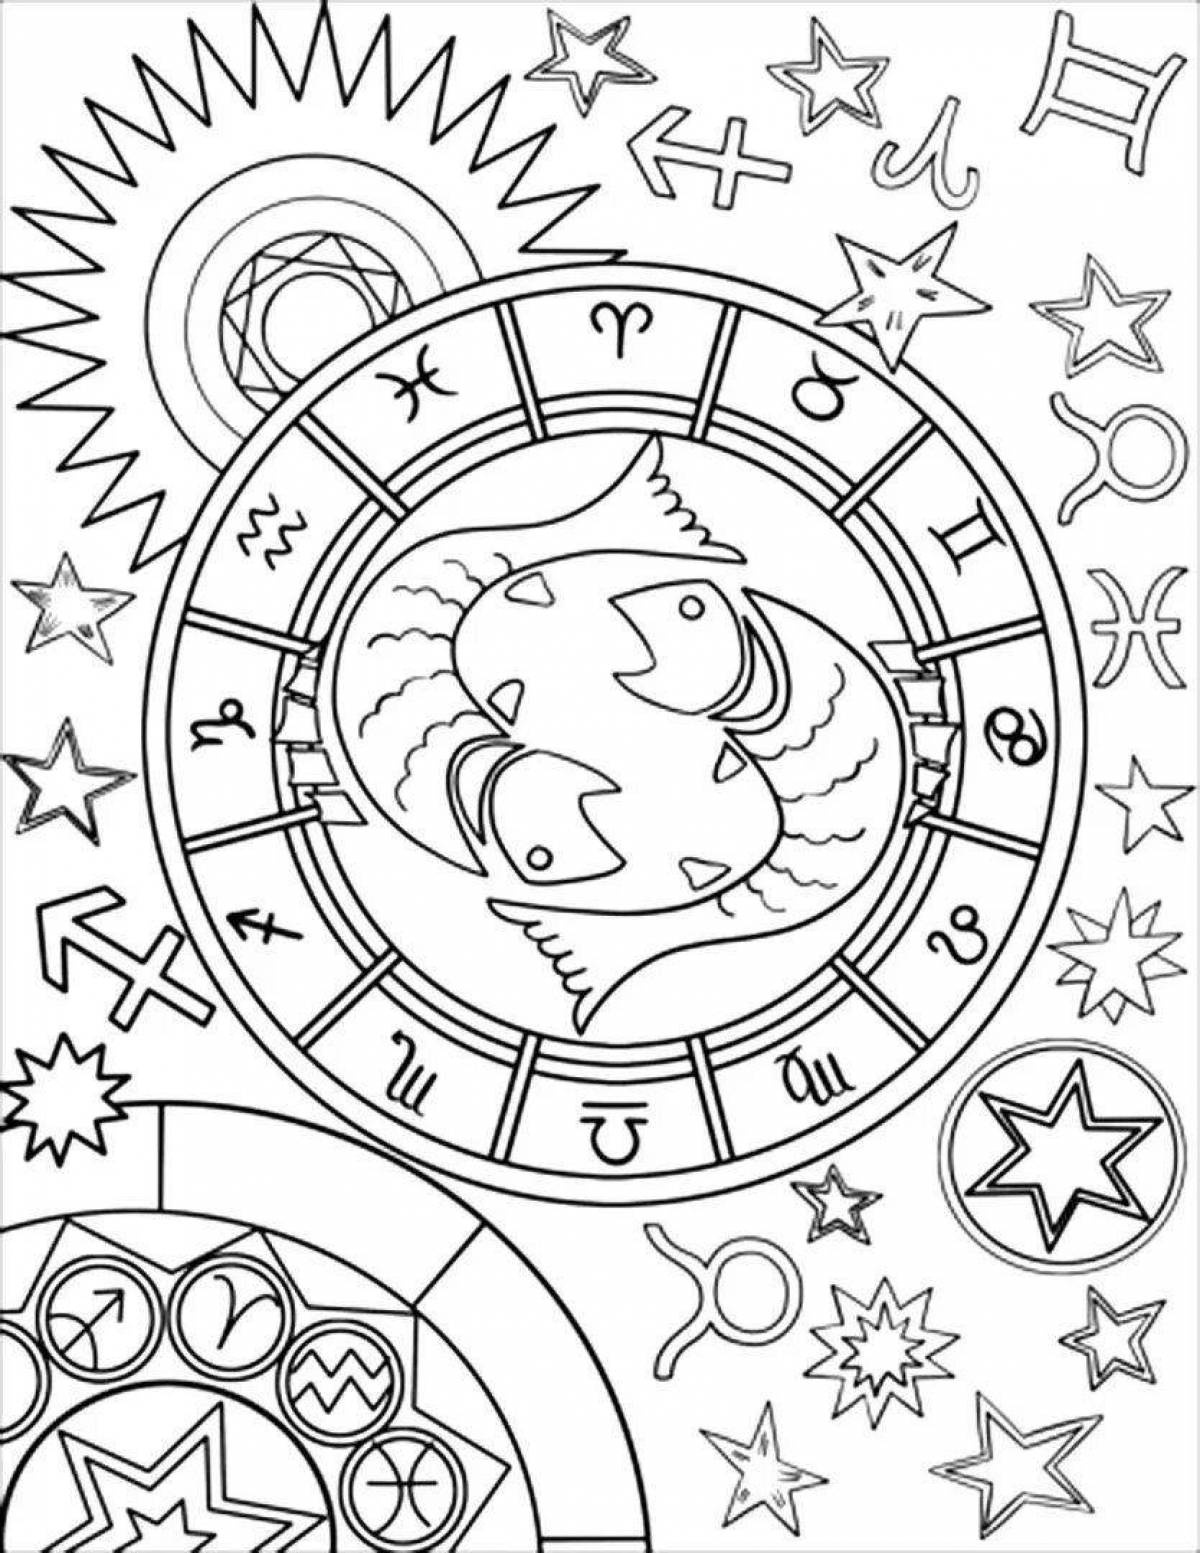 Colorful coloring pages of the signs of the zodiac to develop the creativity of children